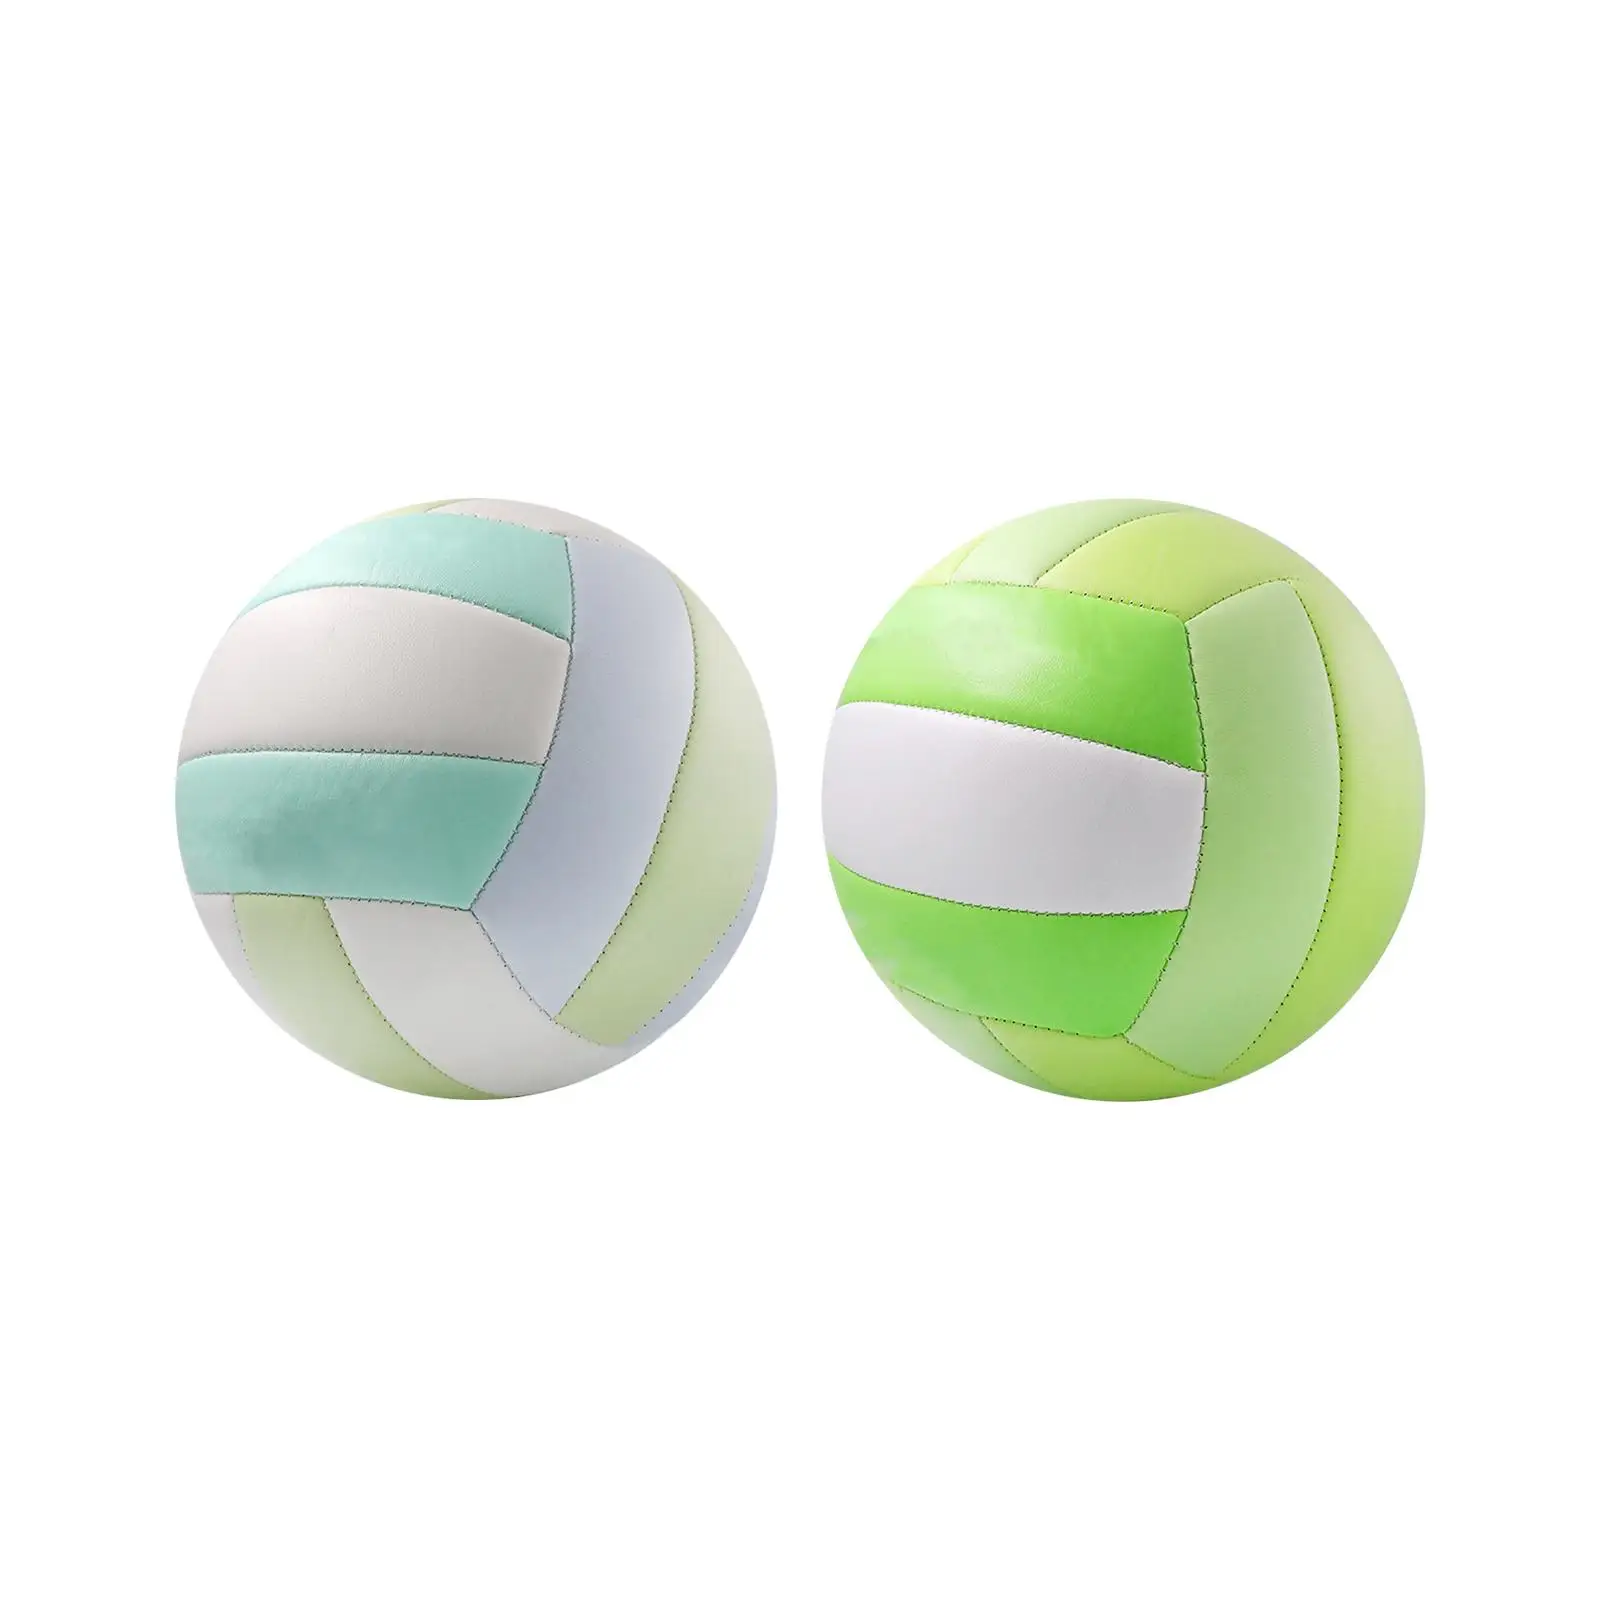 Beach Volleyball Play Pool Official Size 5 Volleyball Indoor Outdoor Volleyball for Youth Kids Teenager Beginners Girls Boys